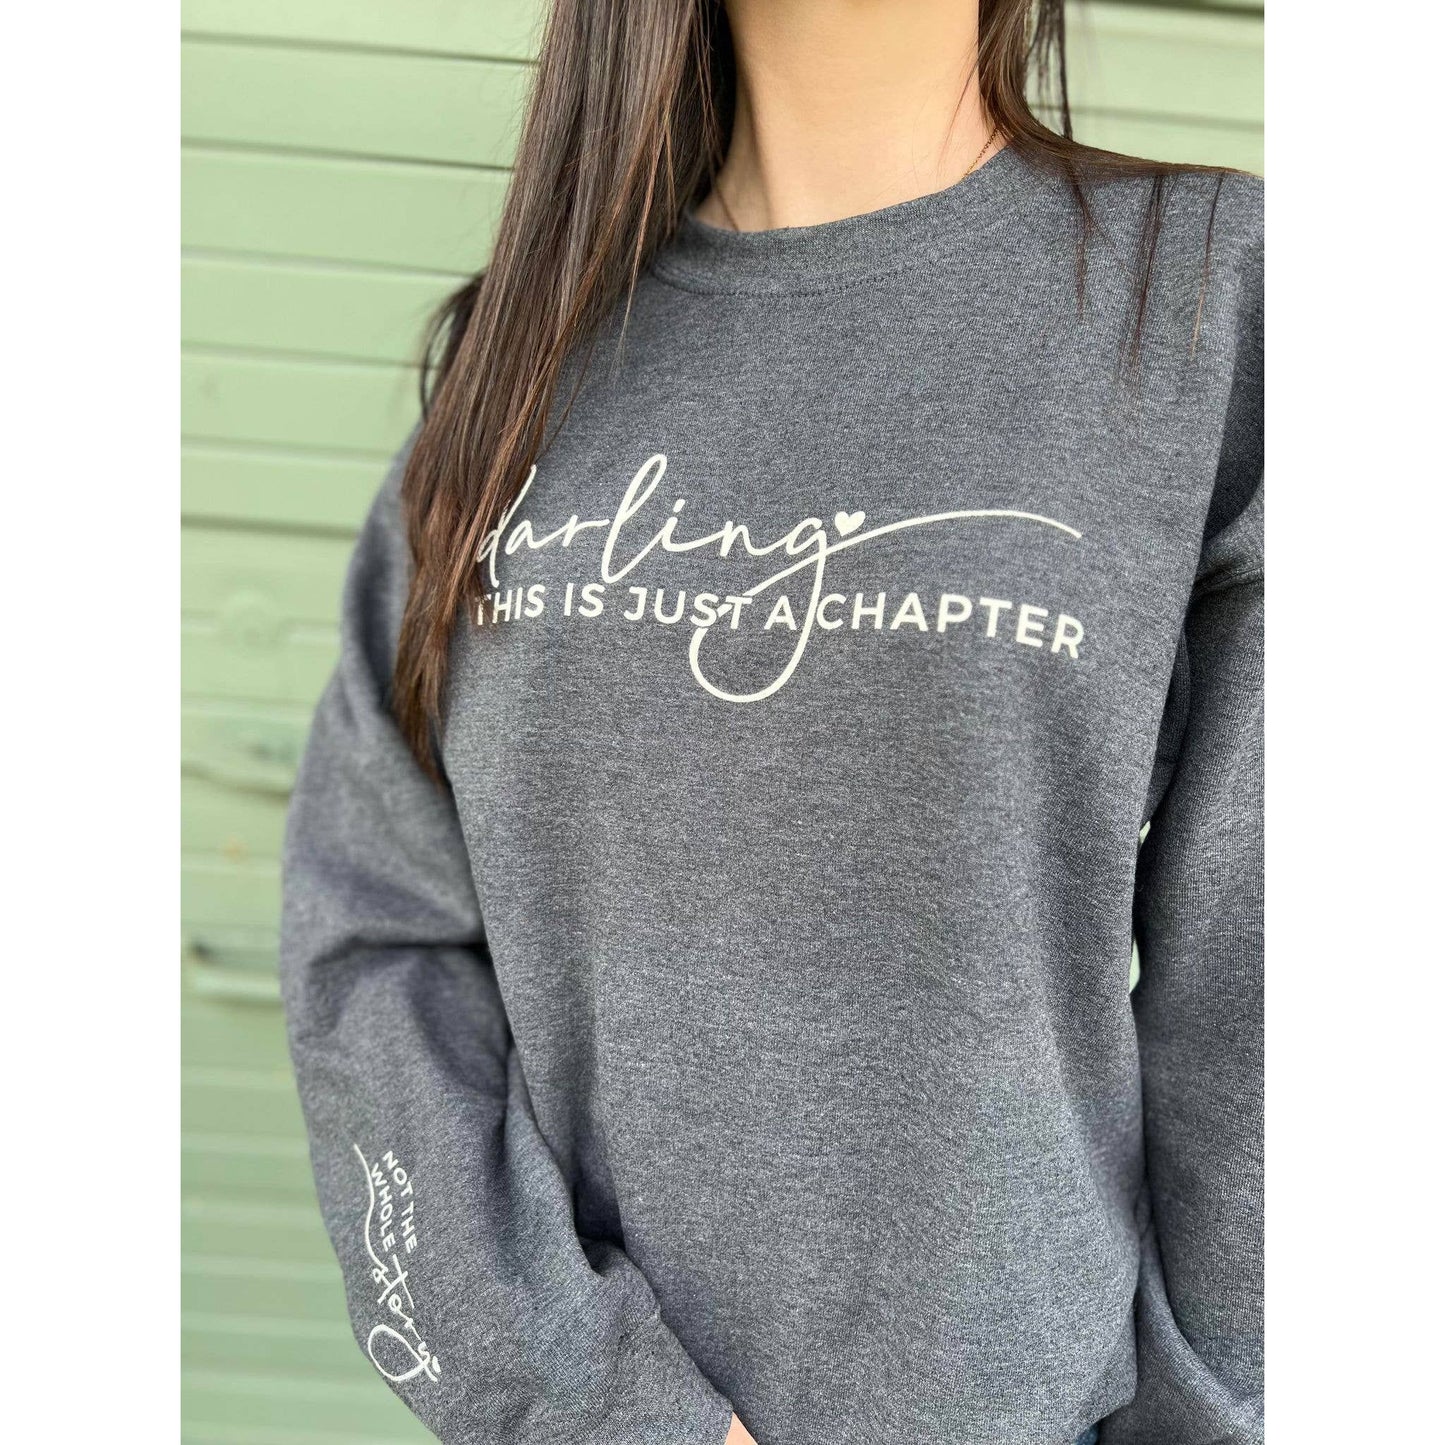 Darling This Is Just A Chapter Sweatshirt